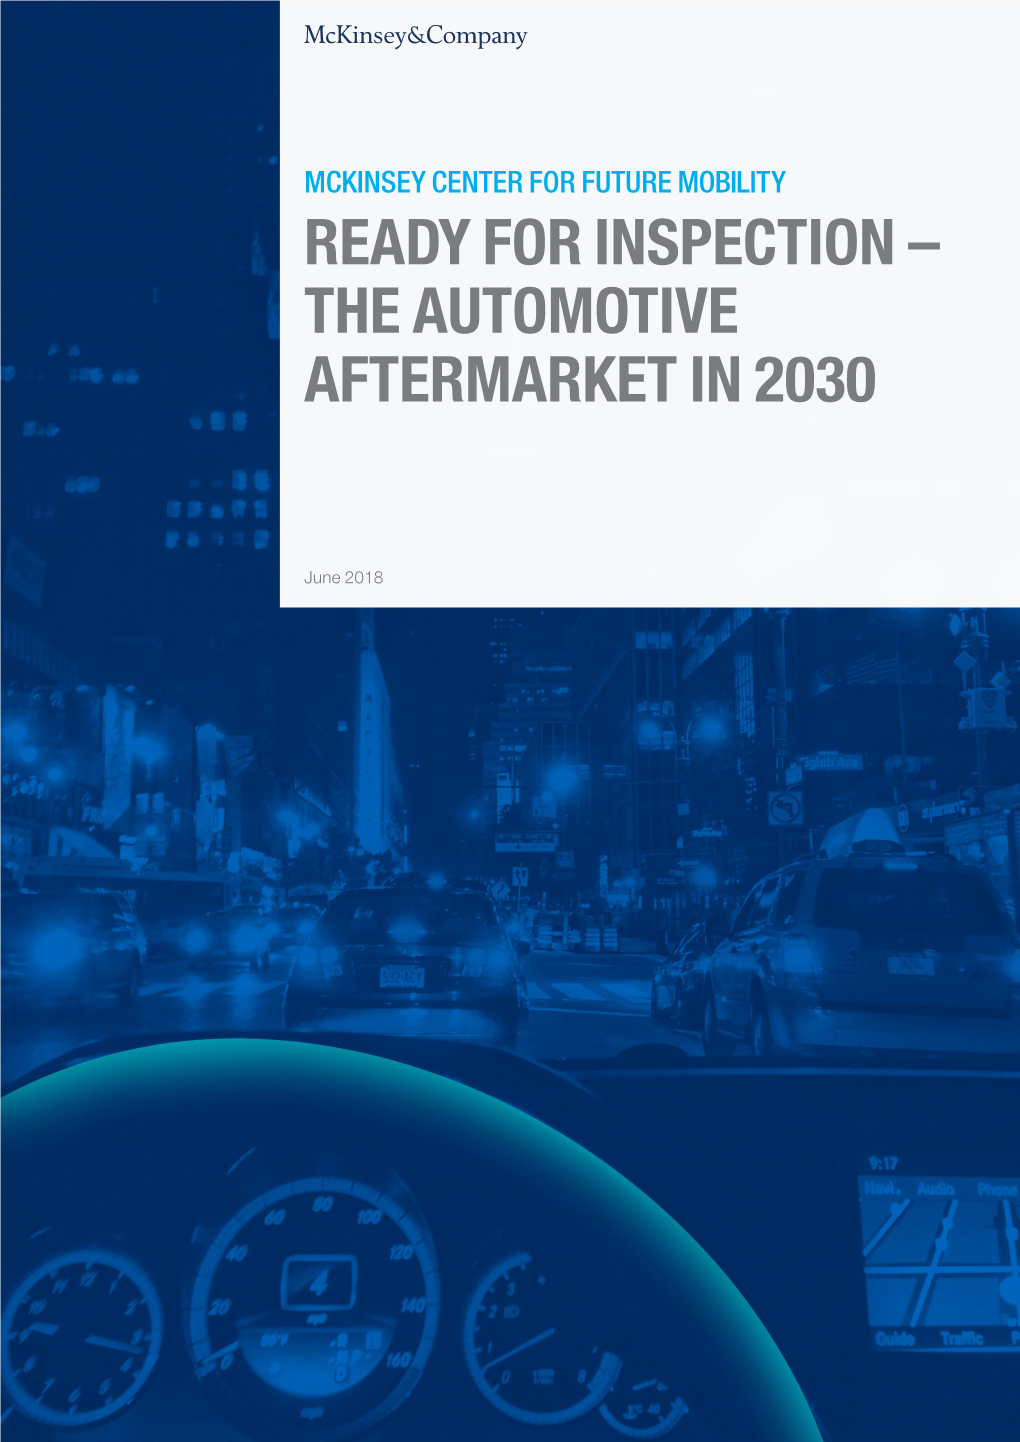 The Automotive Aftermarket in 2030